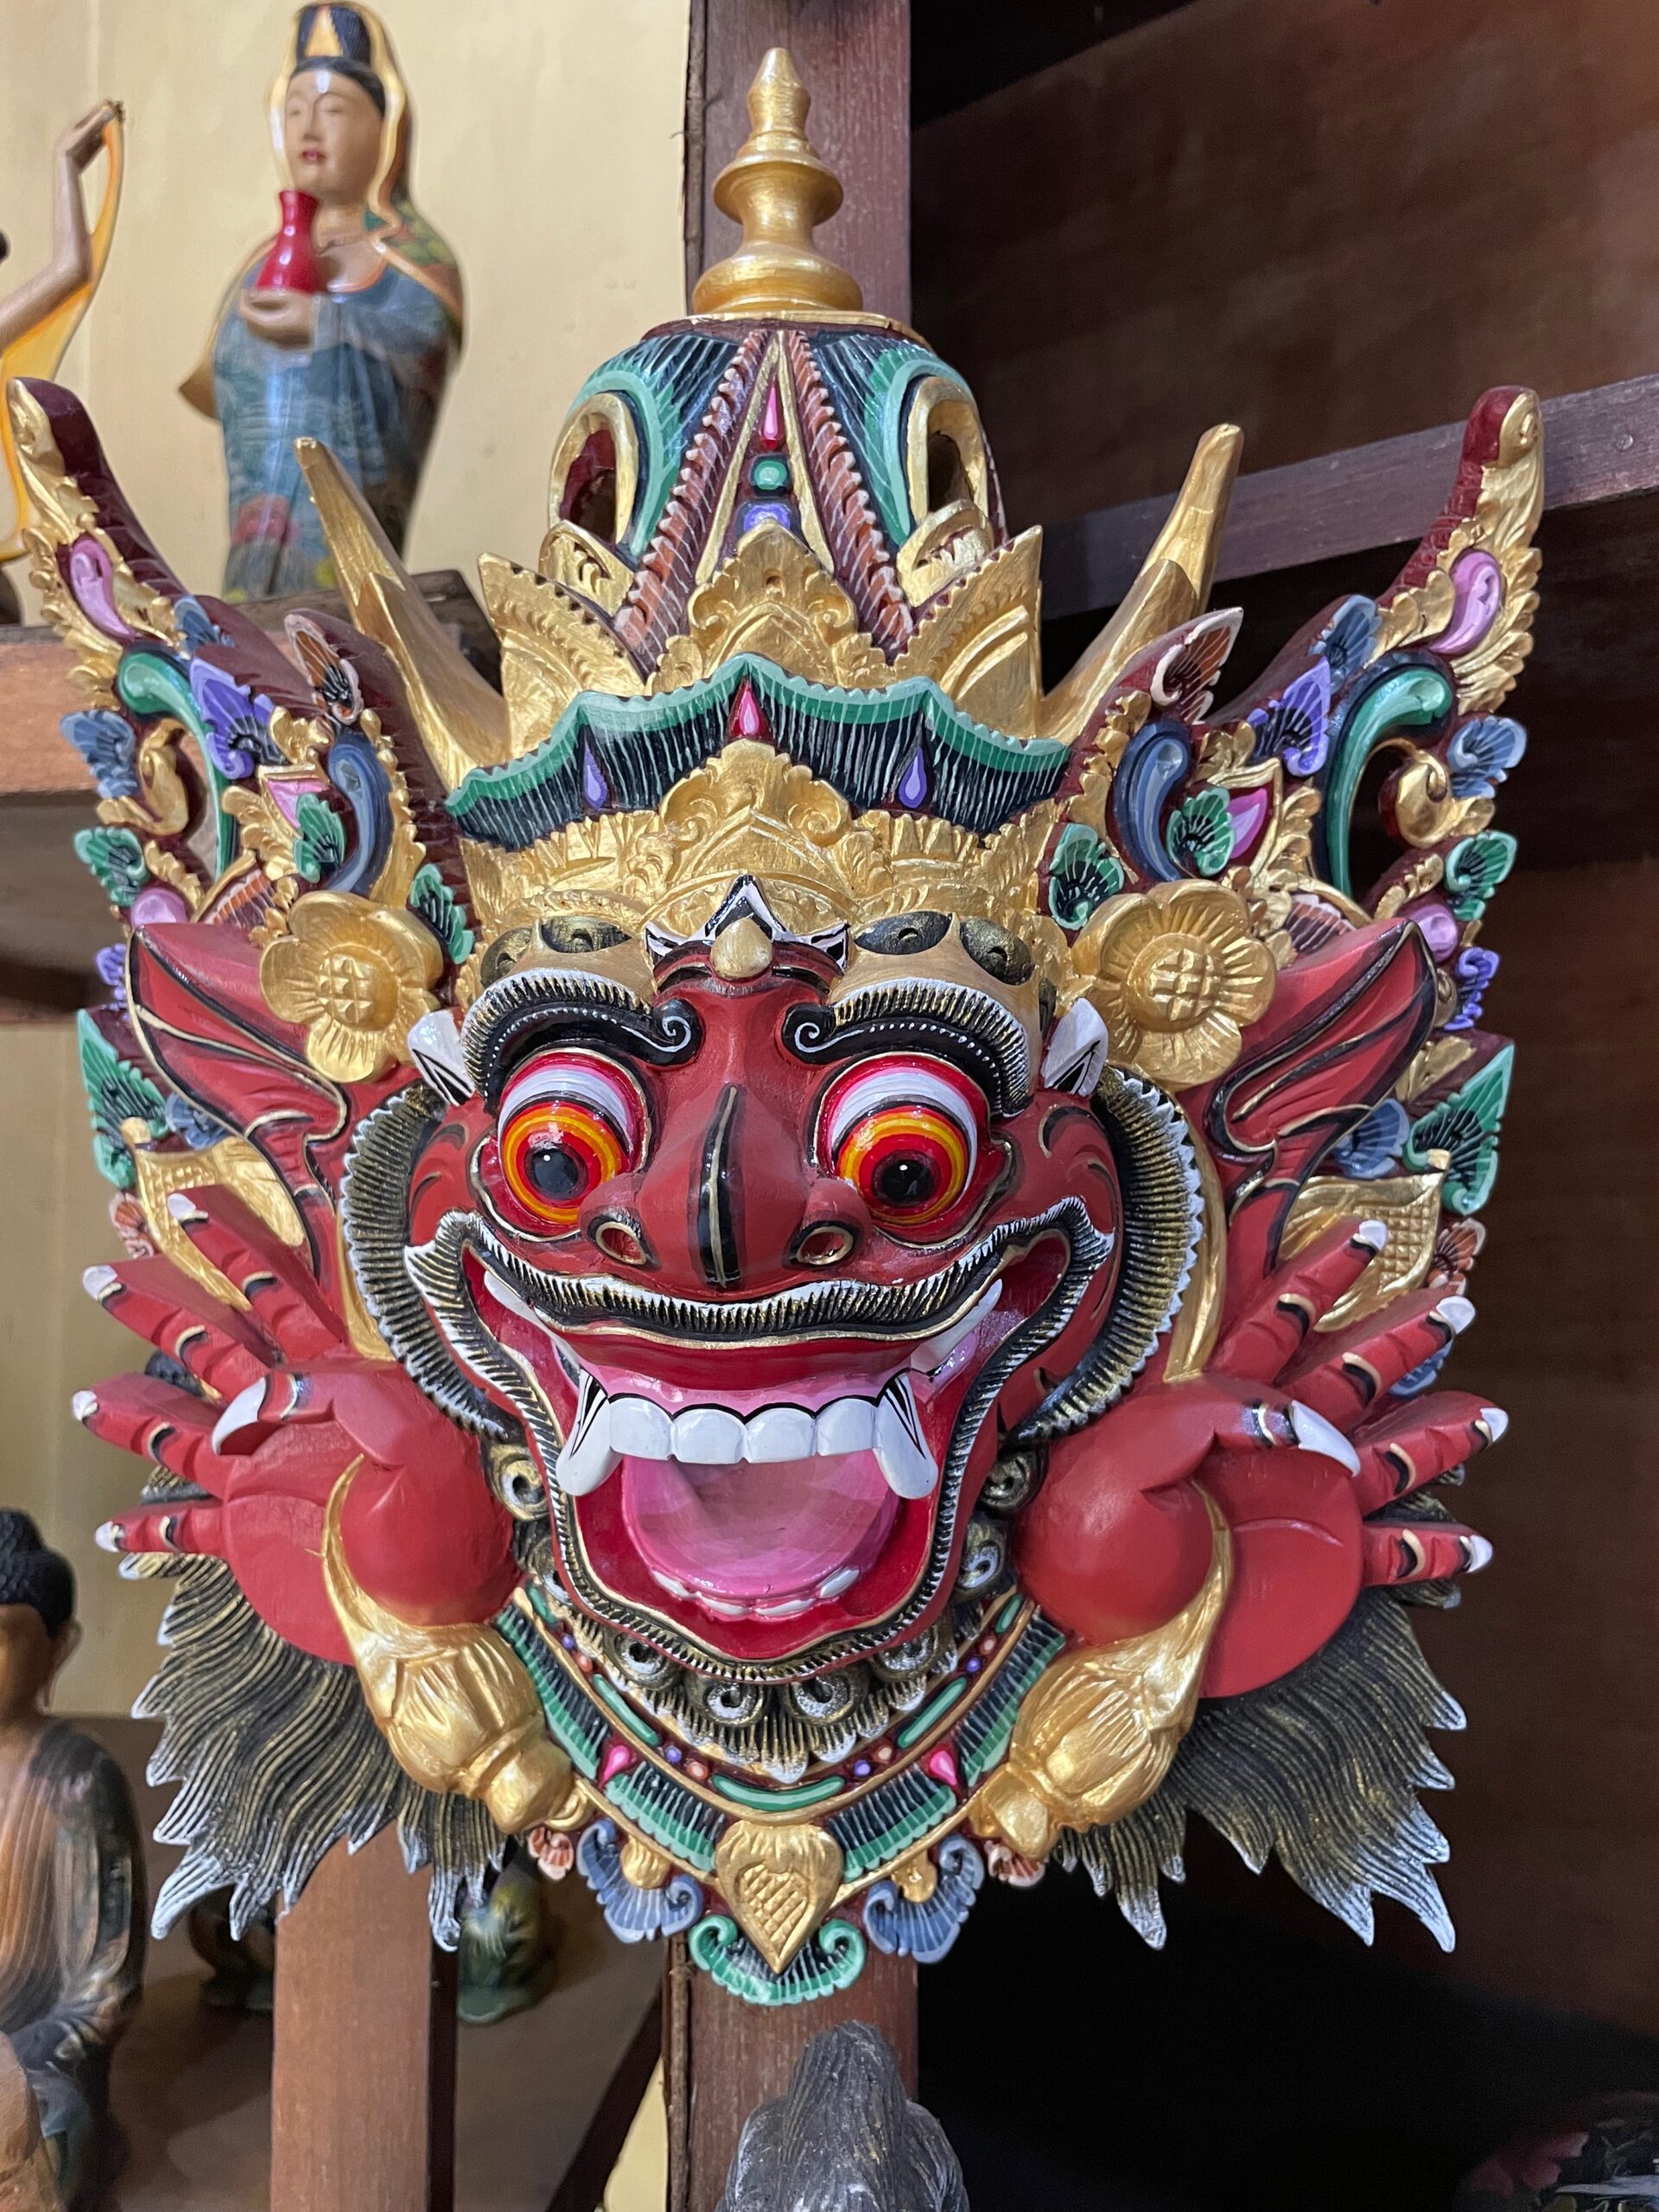 What to buy in Bali? 20 authentic and traditional souvenirs.